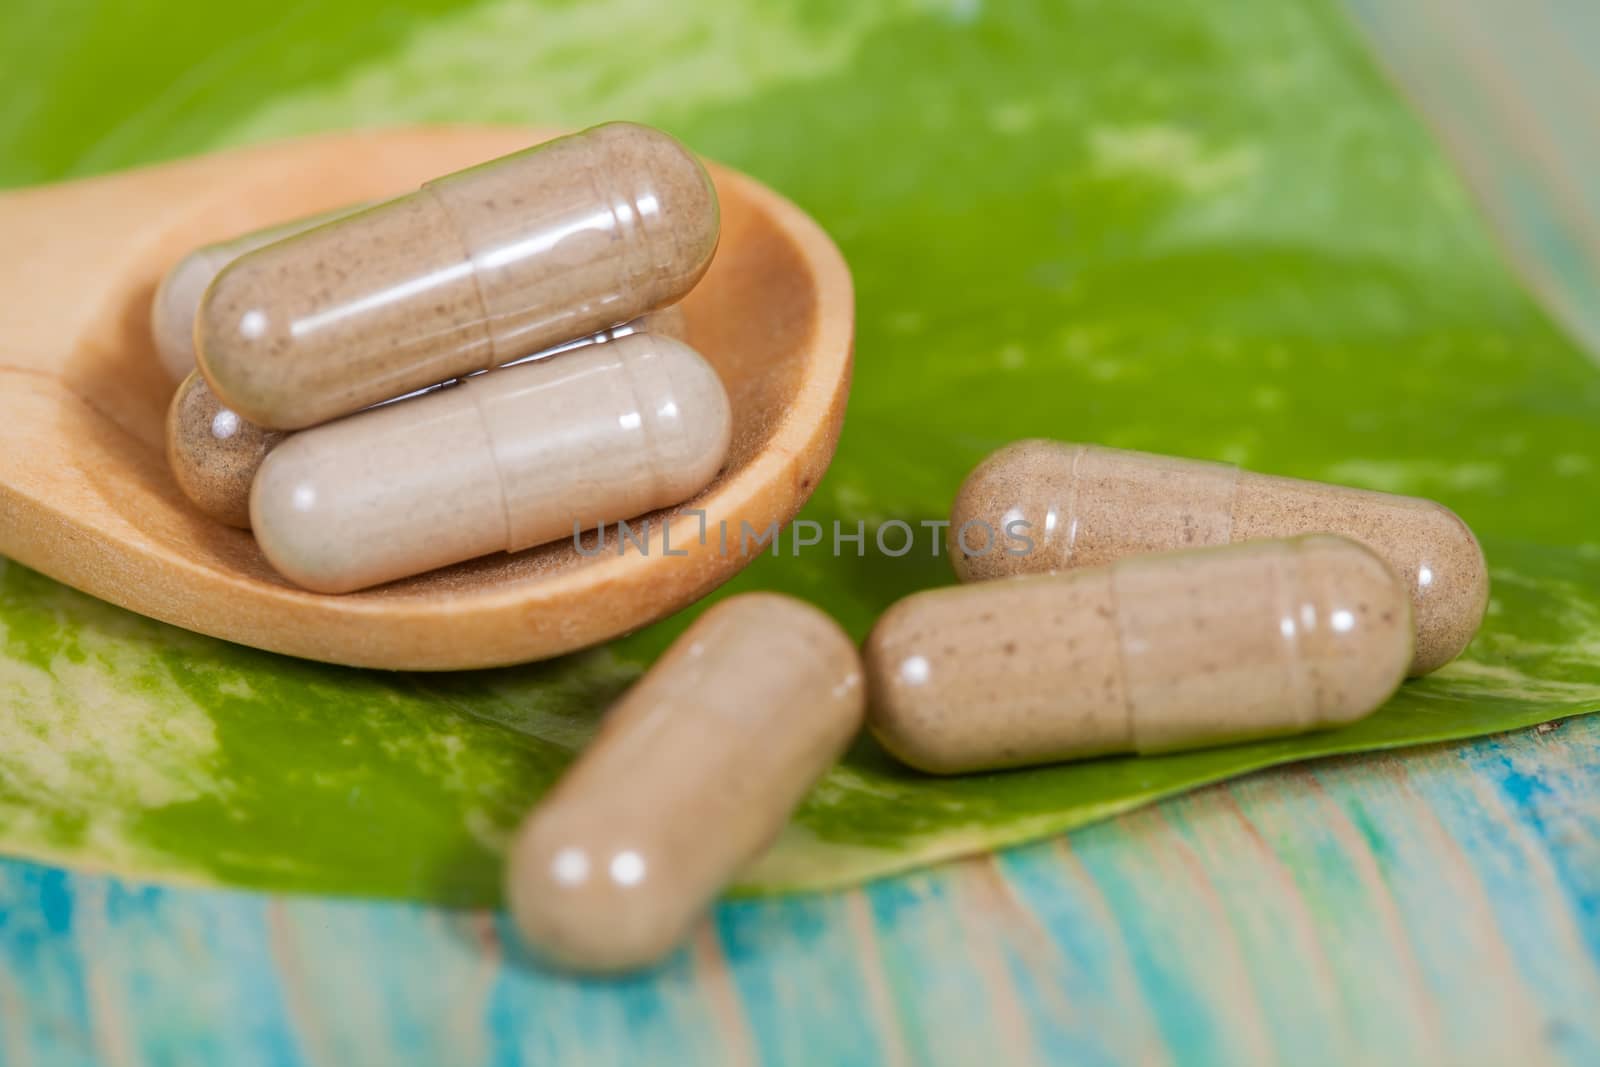 Capsules of herbs on spoon. healthy eating for healthy living. by amnarj2006